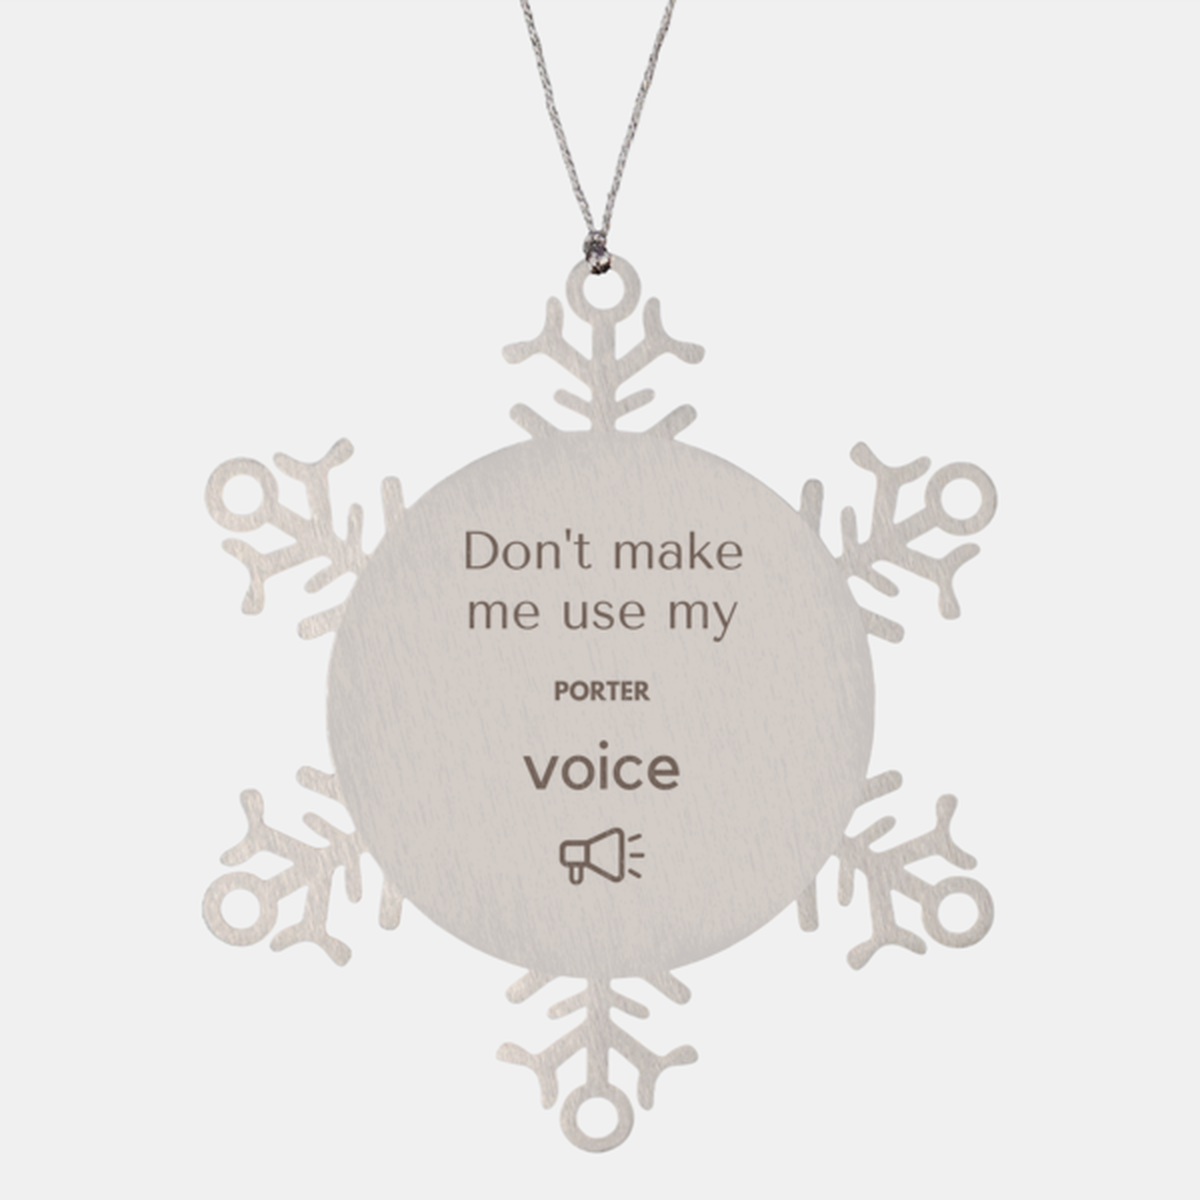 Don't make me use my Porter voice, Sarcasm Porter Ornament Gifts, Christmas Porter Snowflake Ornament Unique Gifts For Porter Coworkers, Men, Women, Colleague, Friends